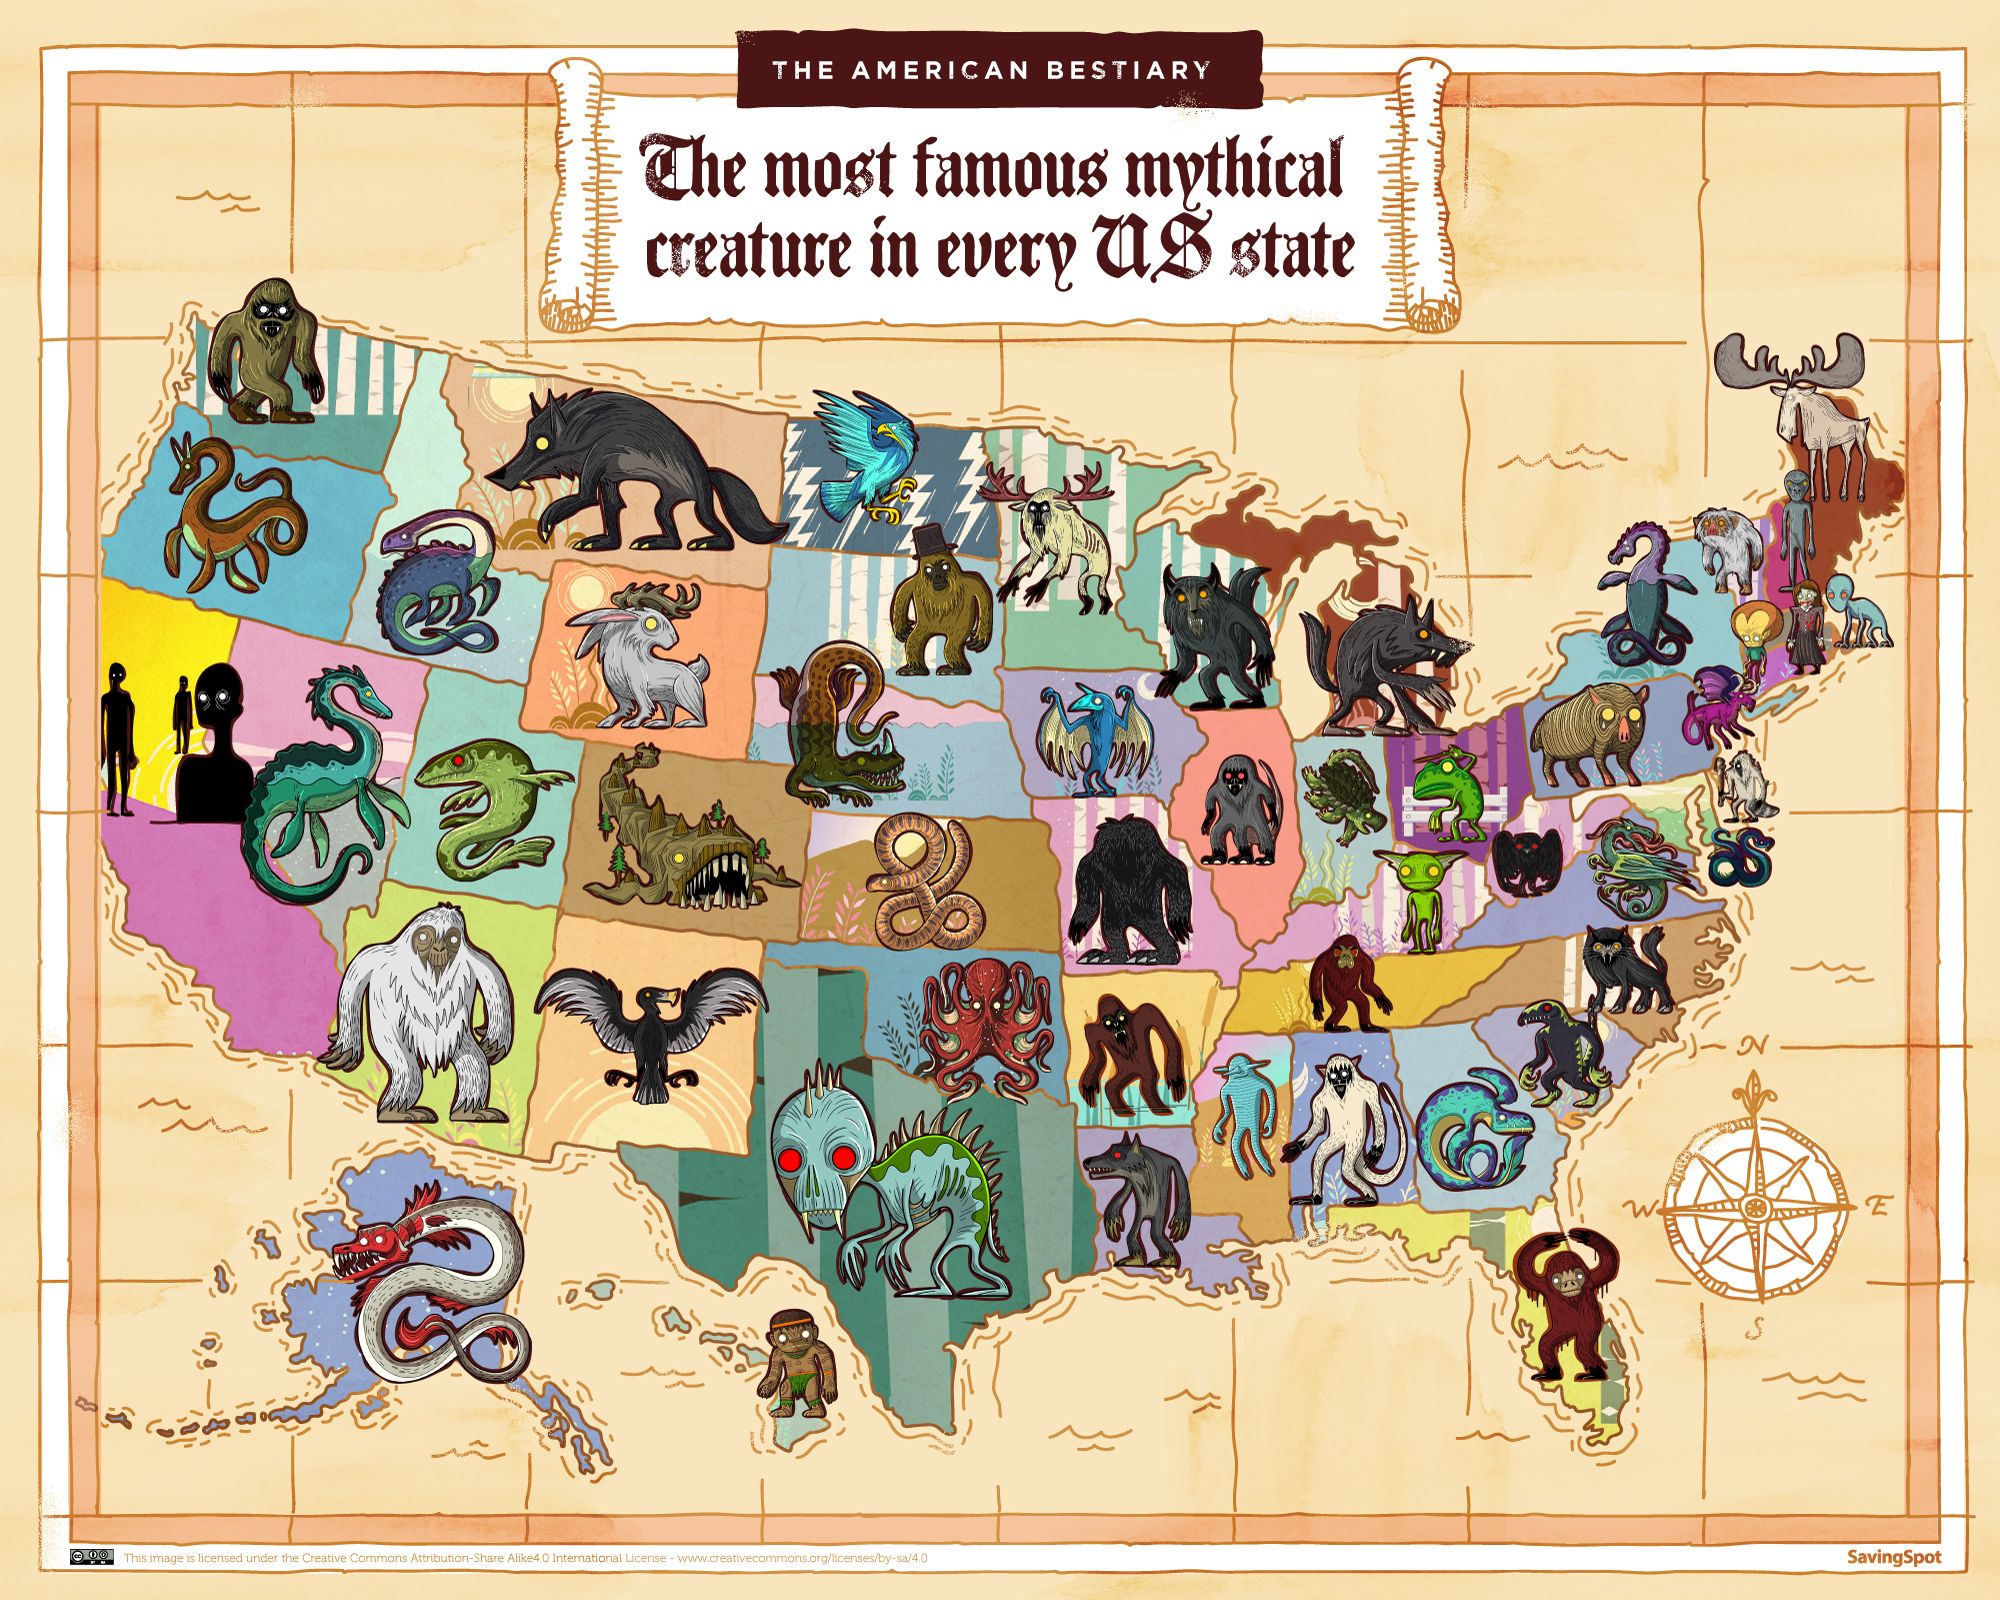 The American Bestiary: The Most Famous Mythical Creature of Every